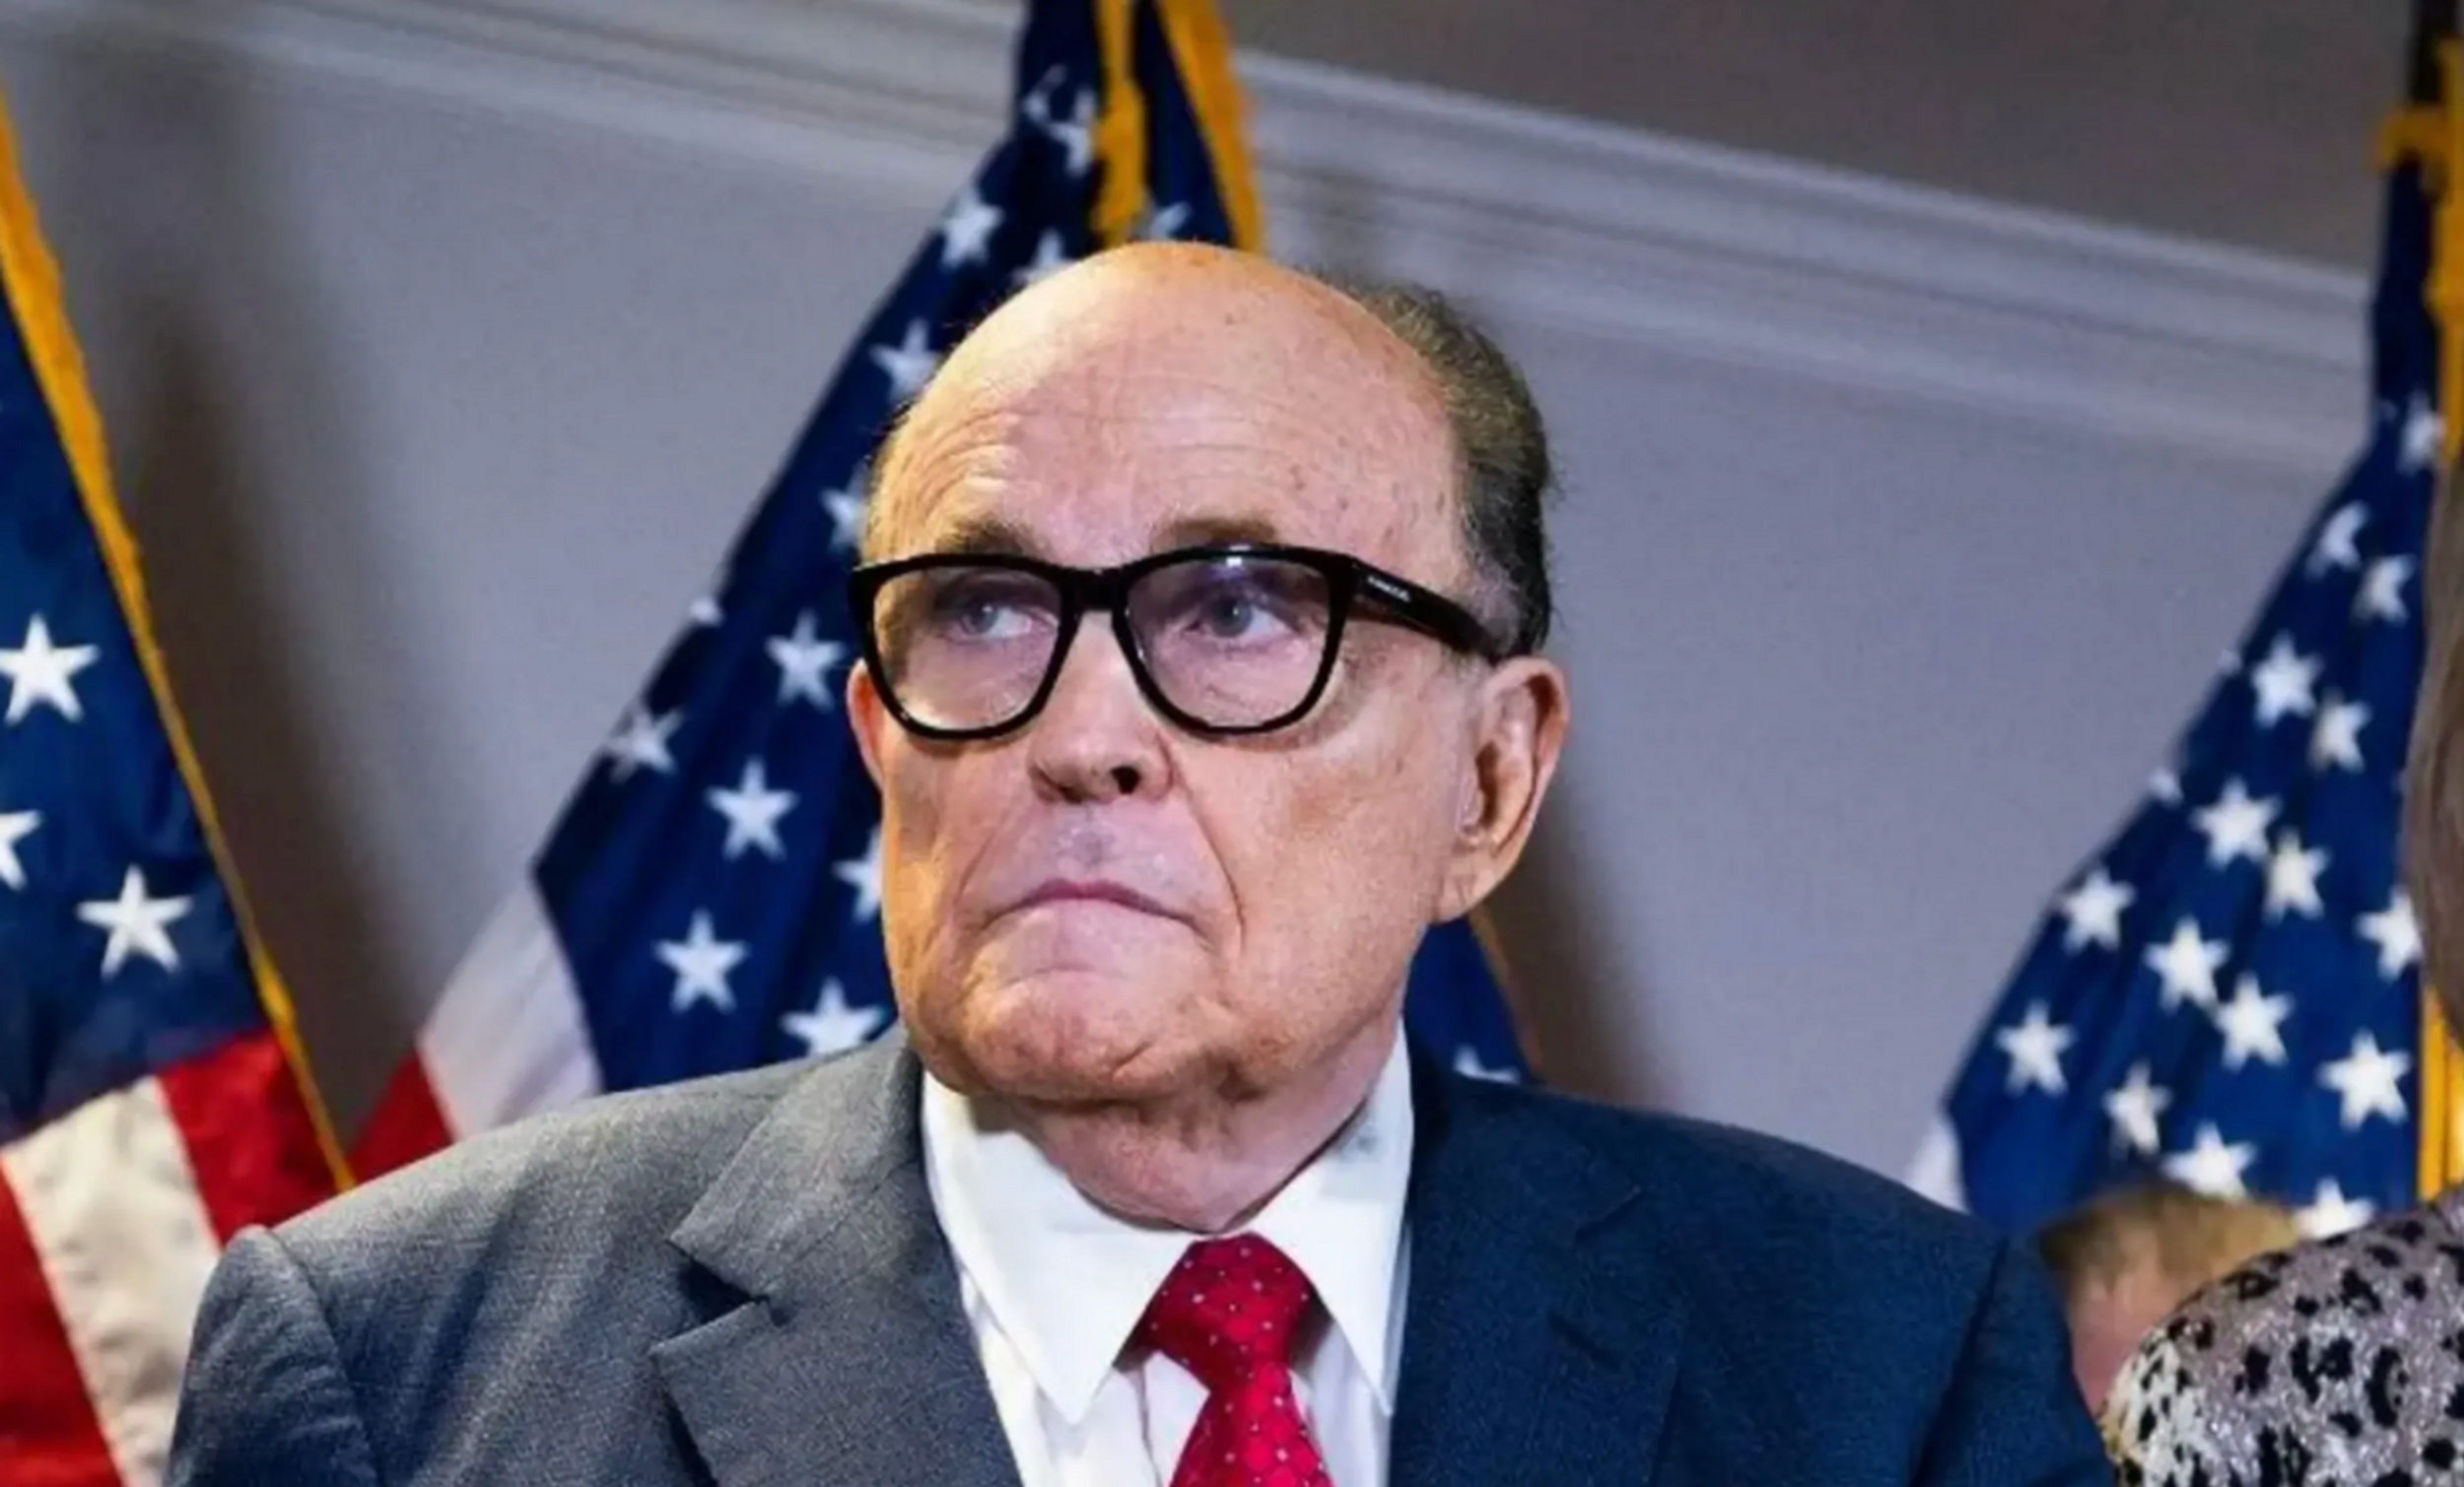 Rudy Giuliani Is in the News Again—Is the Justice Department About to Charge Him?